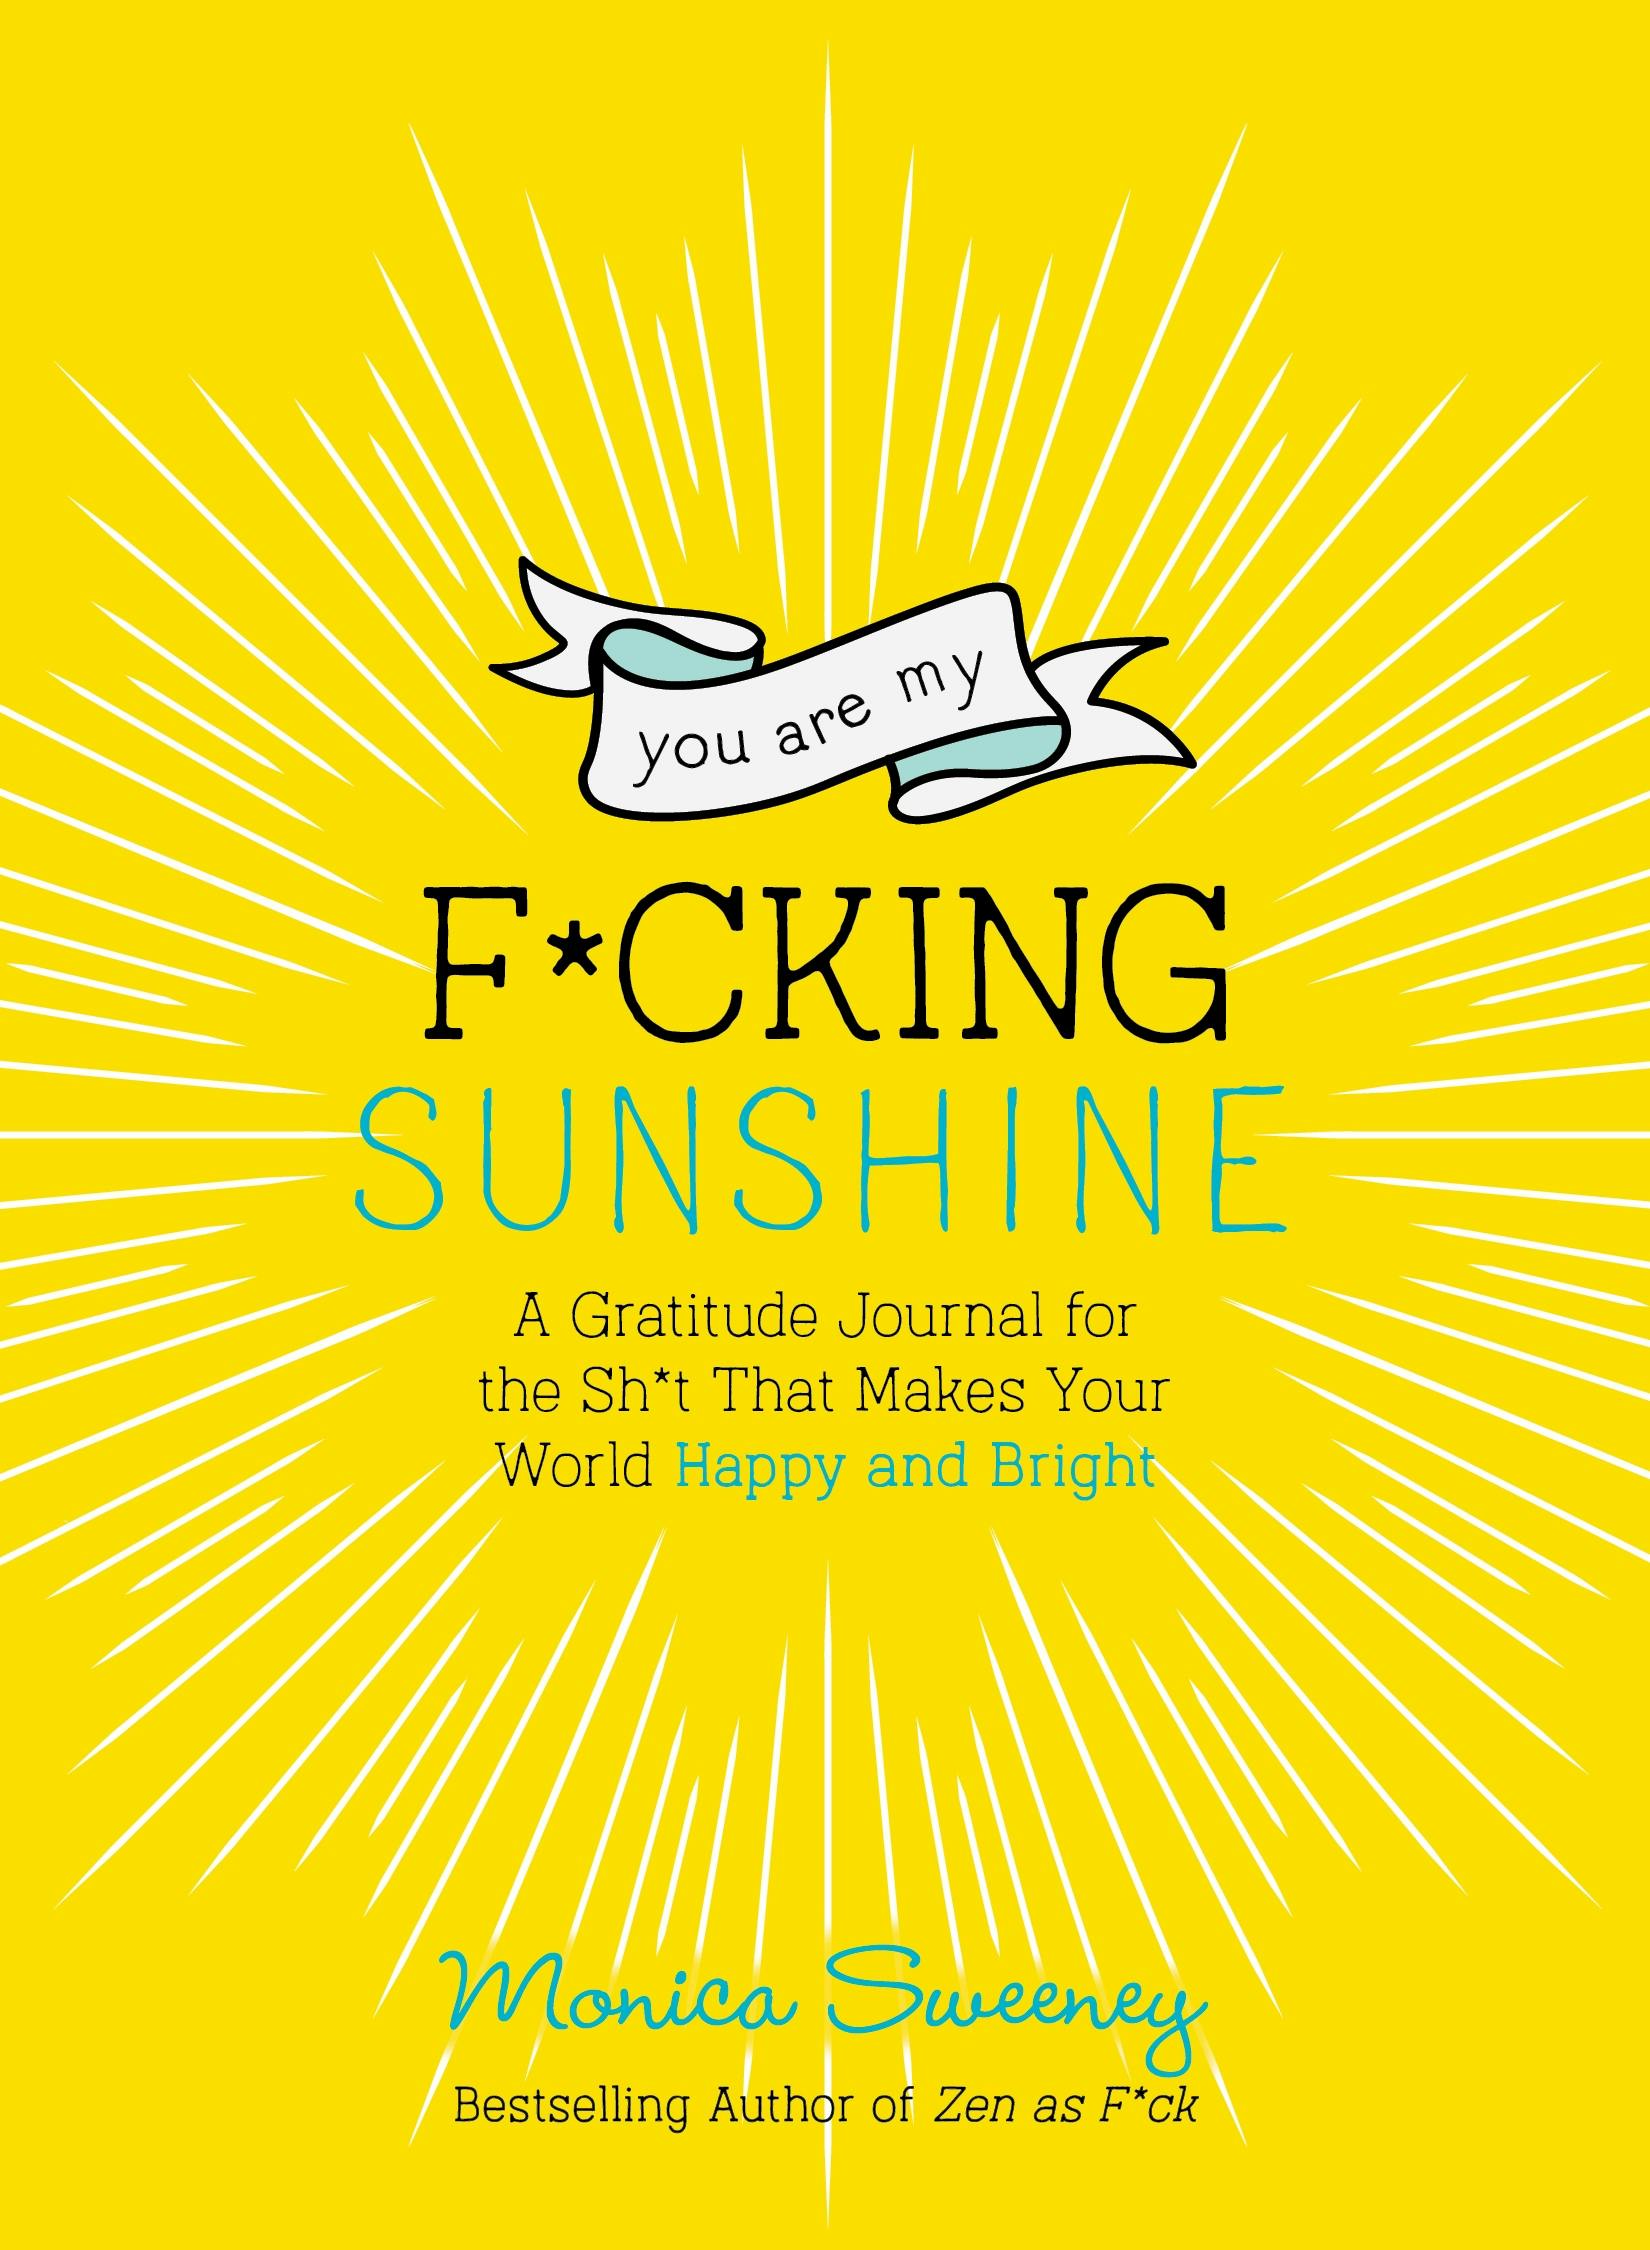 You Are My F*cking Sunshine